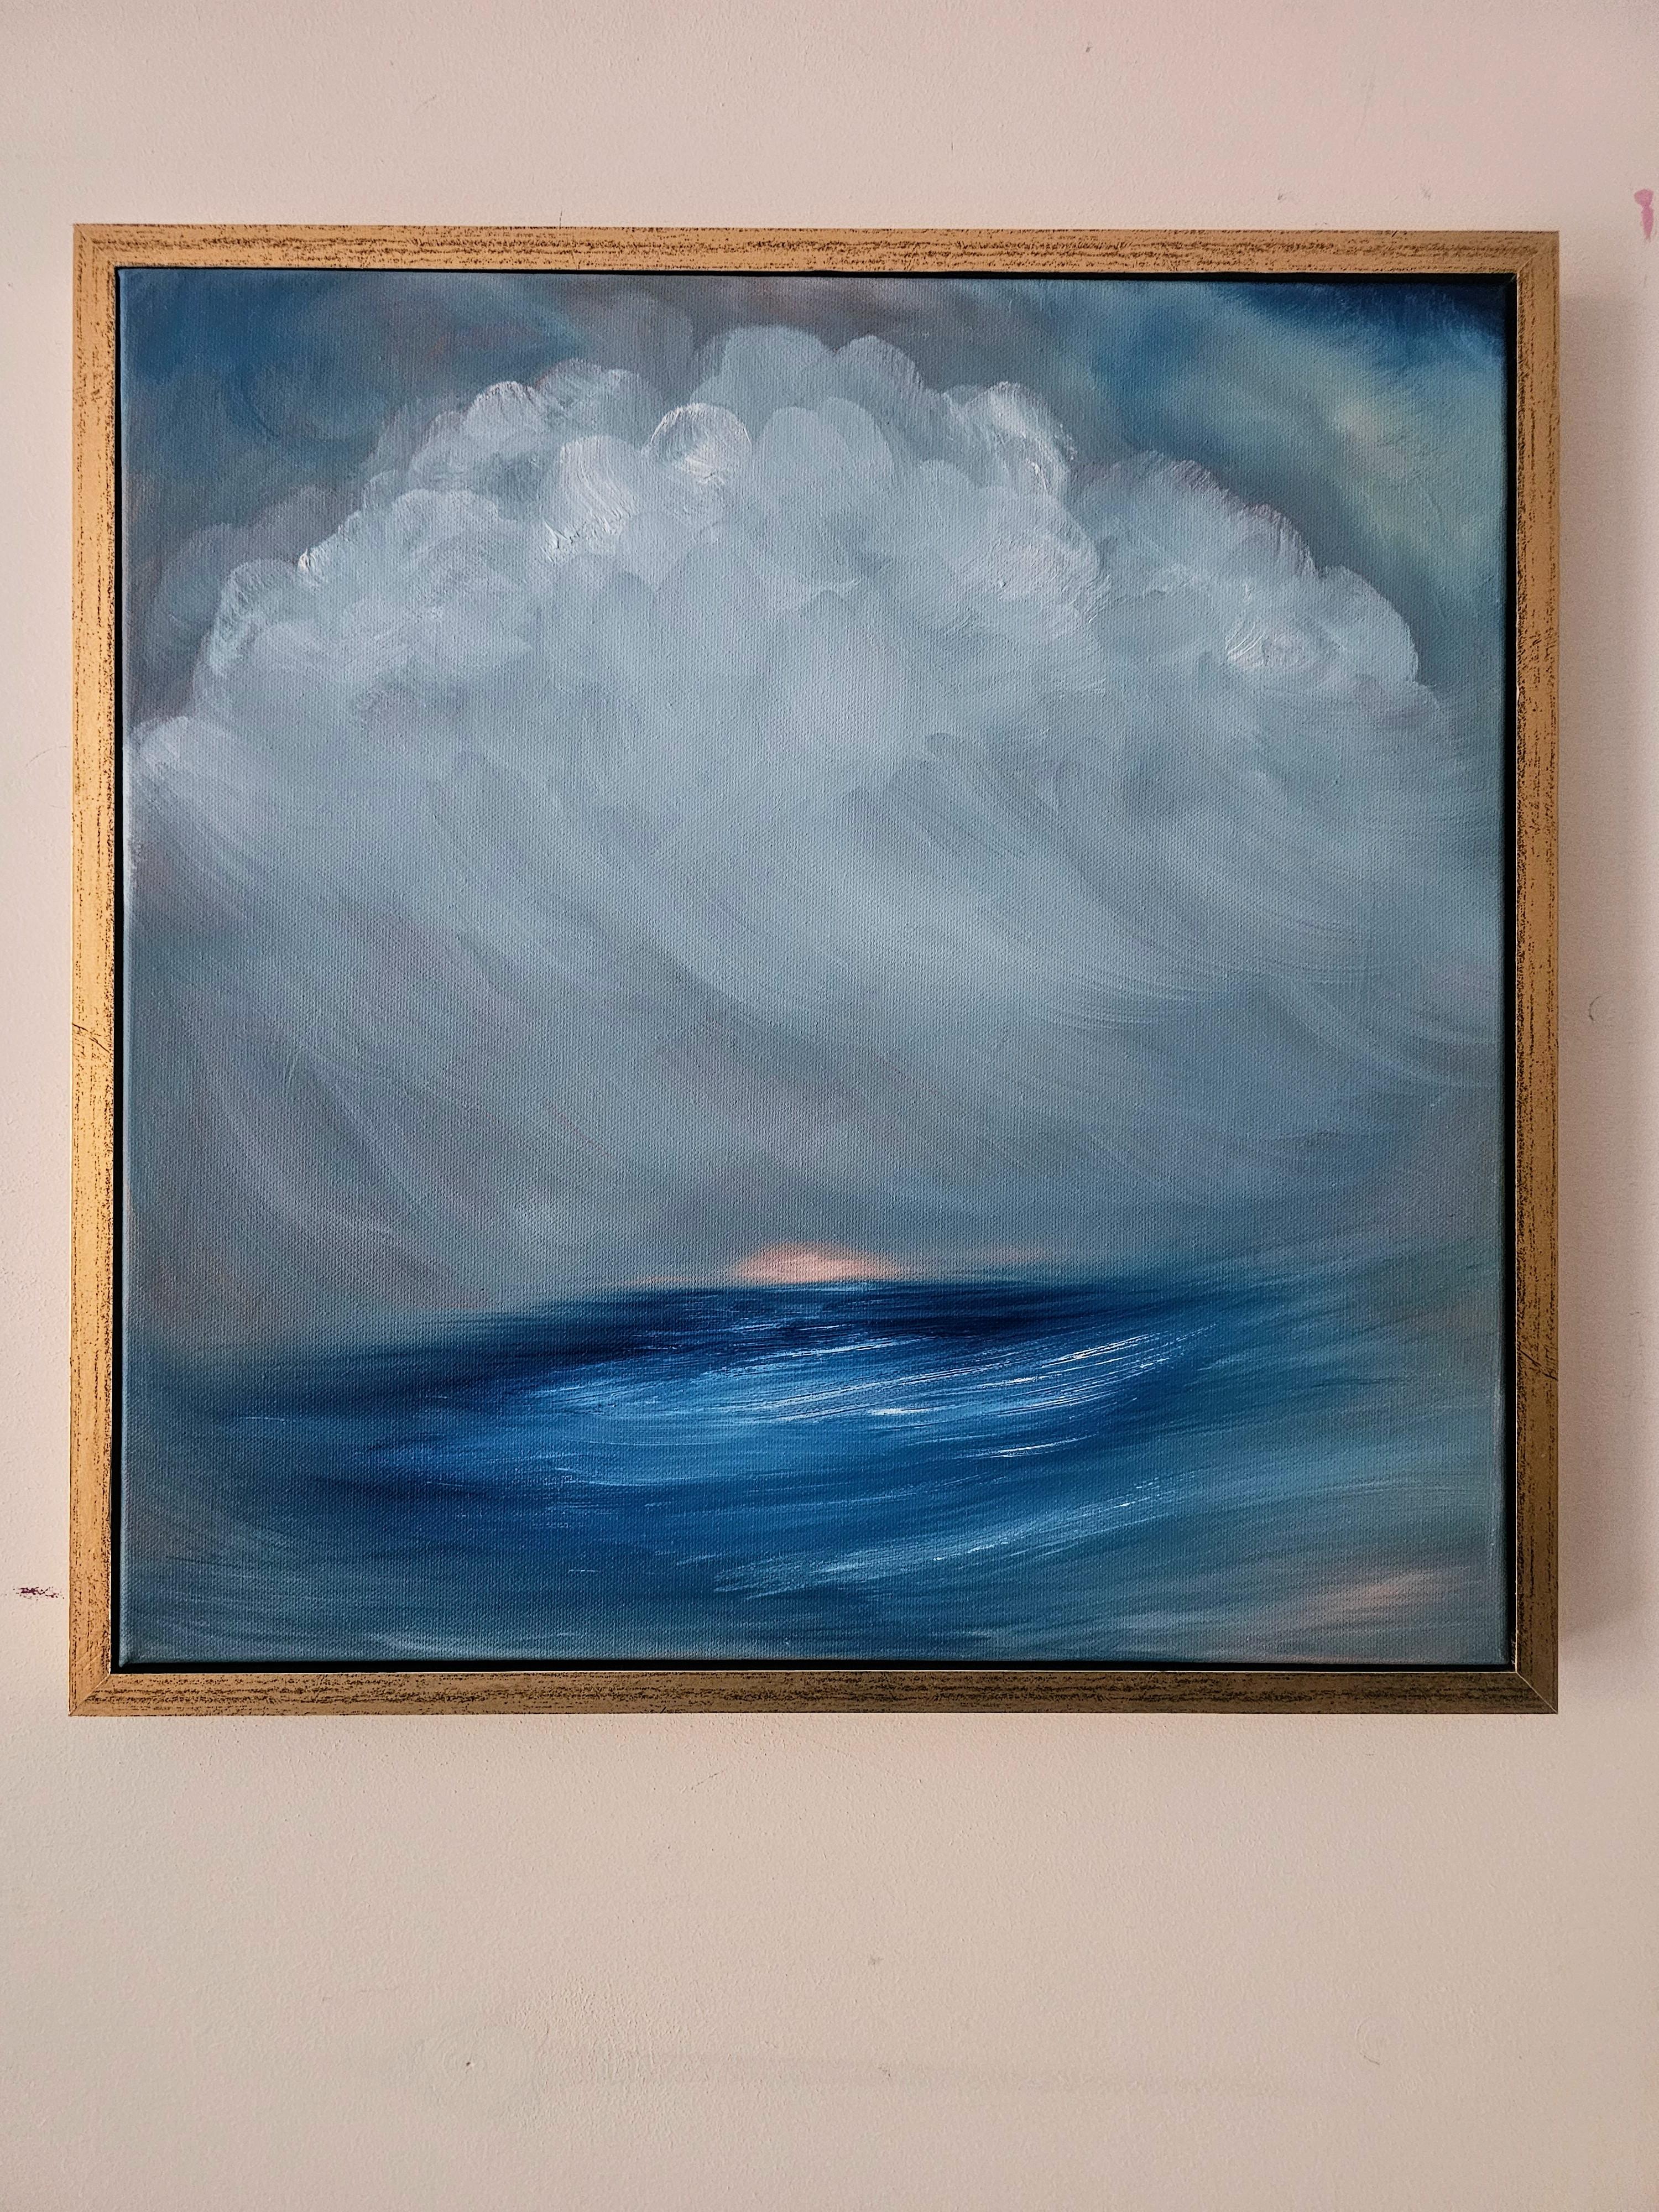 Sailing on the astral plane - Framed abstract blue seascape painting For Sale 2